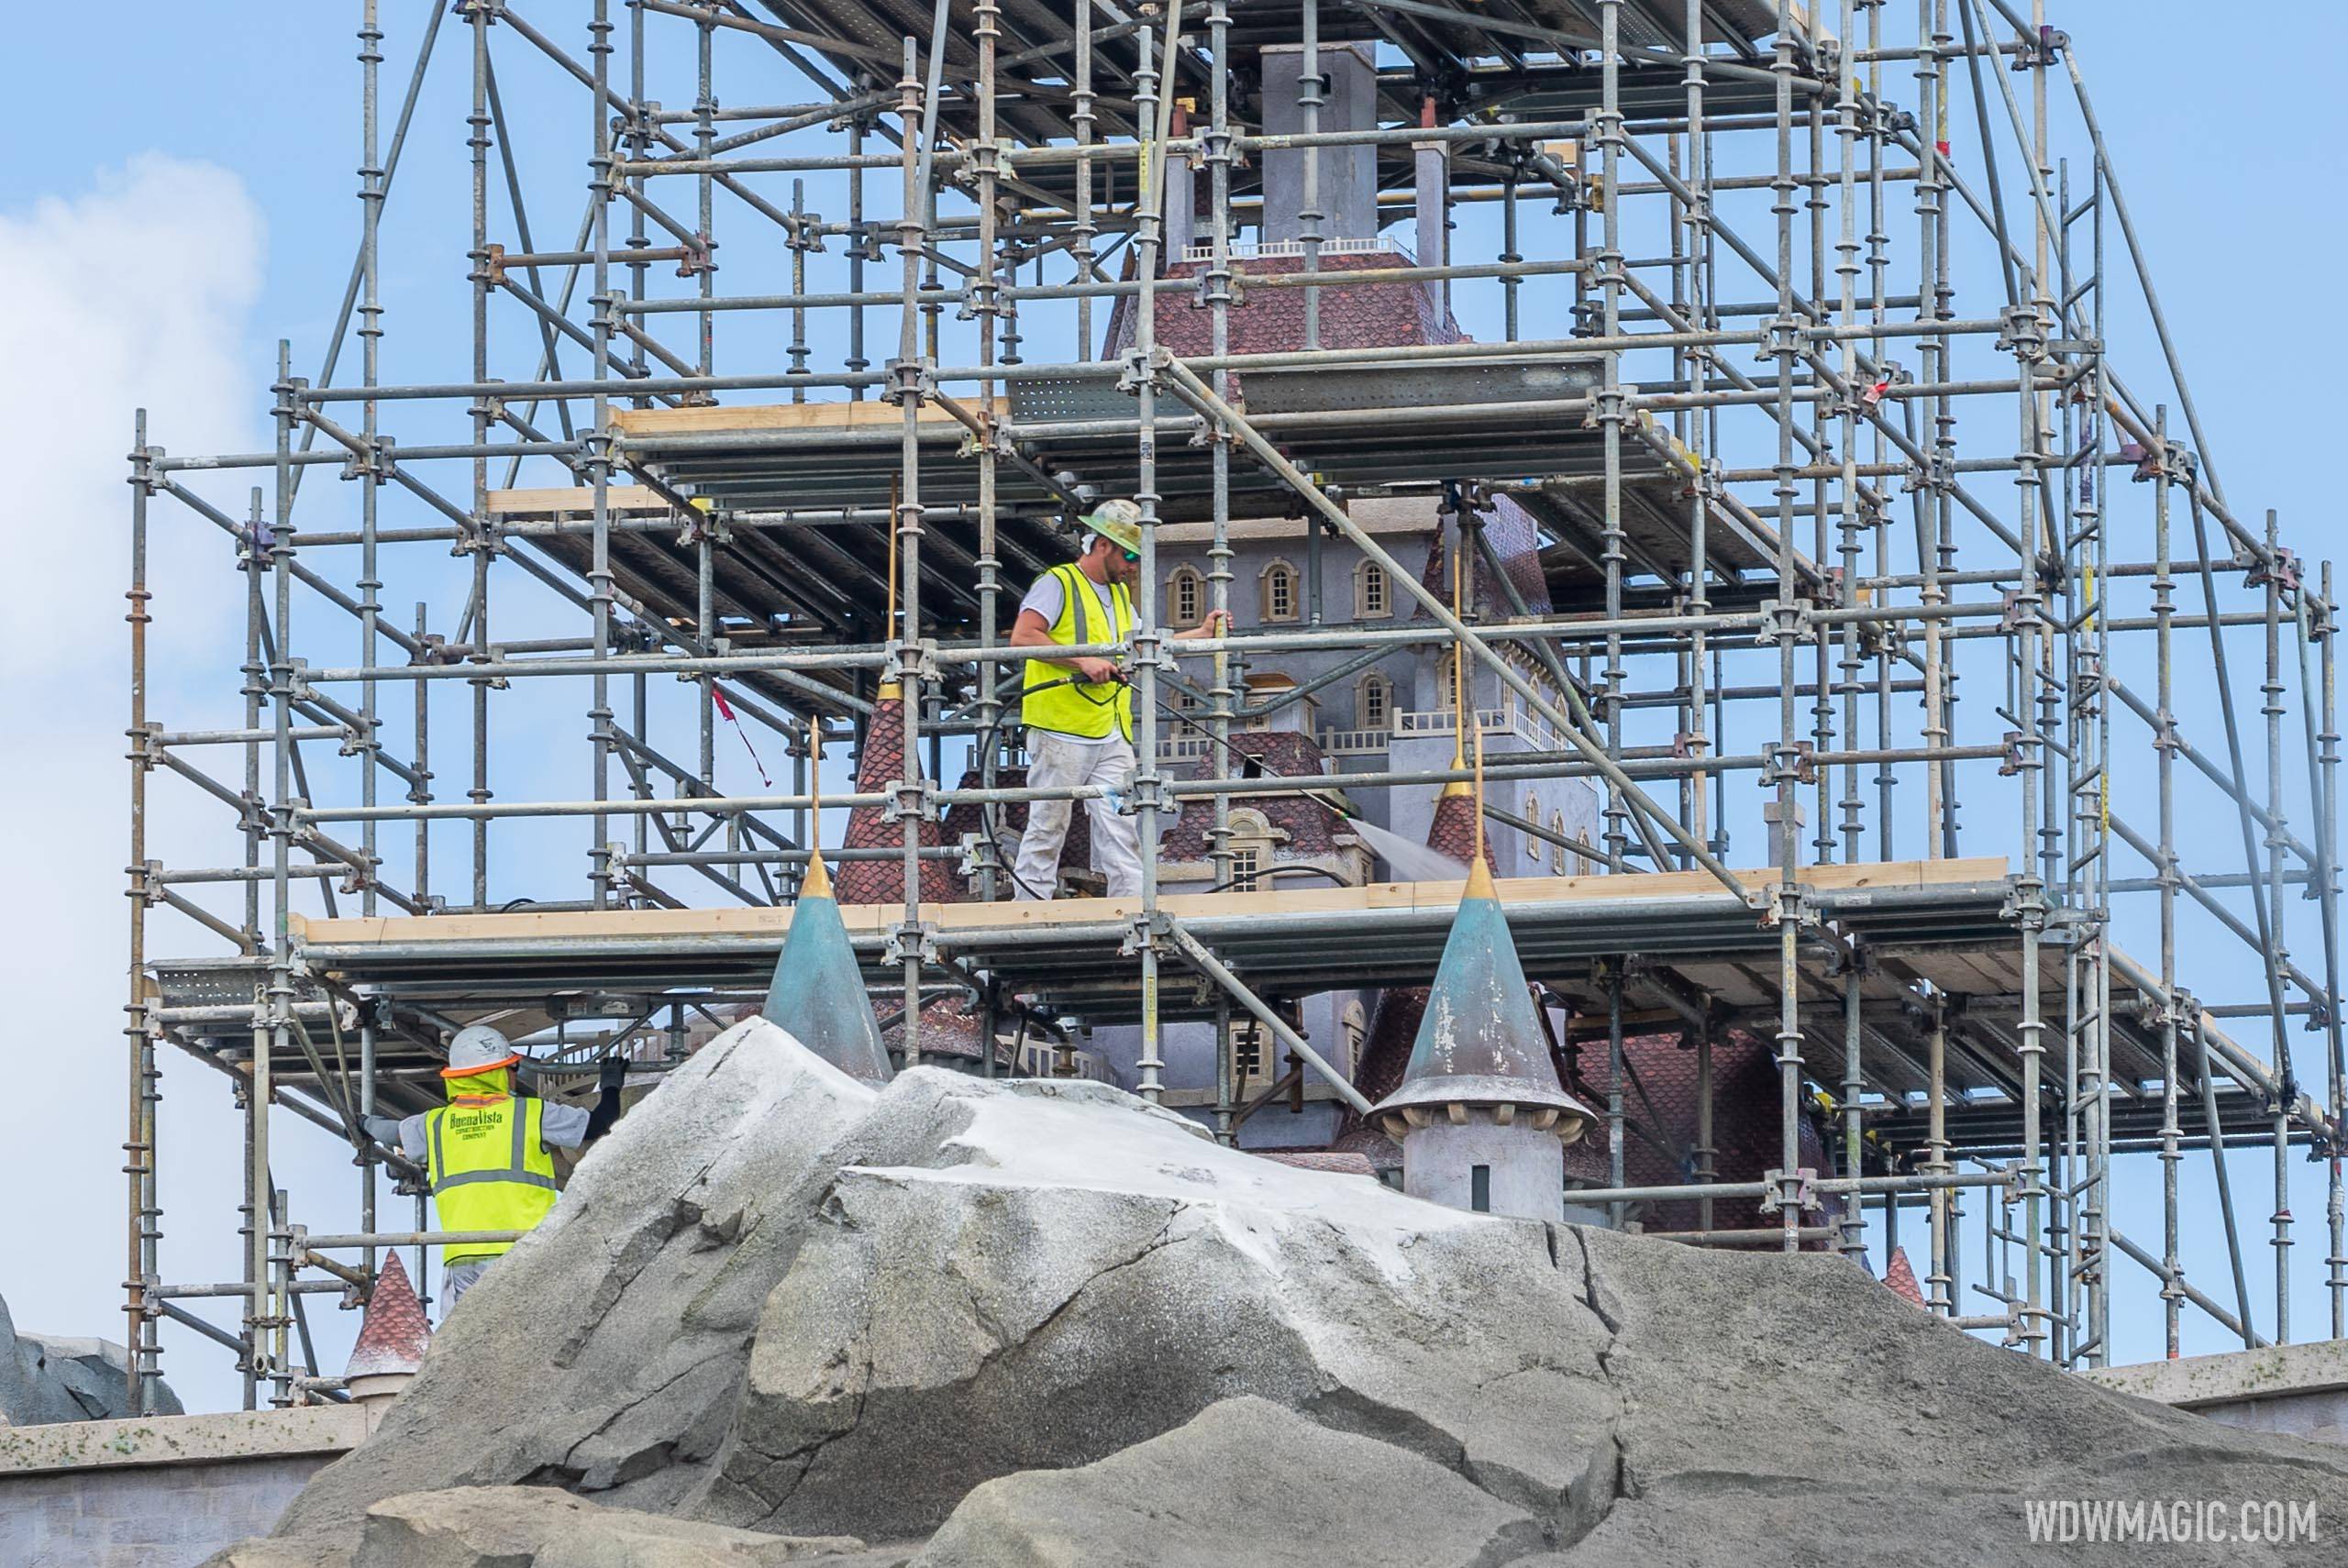 Beast's castle covered in scaffolding as 'Be Our Guest Restaurant' refurbishment continues